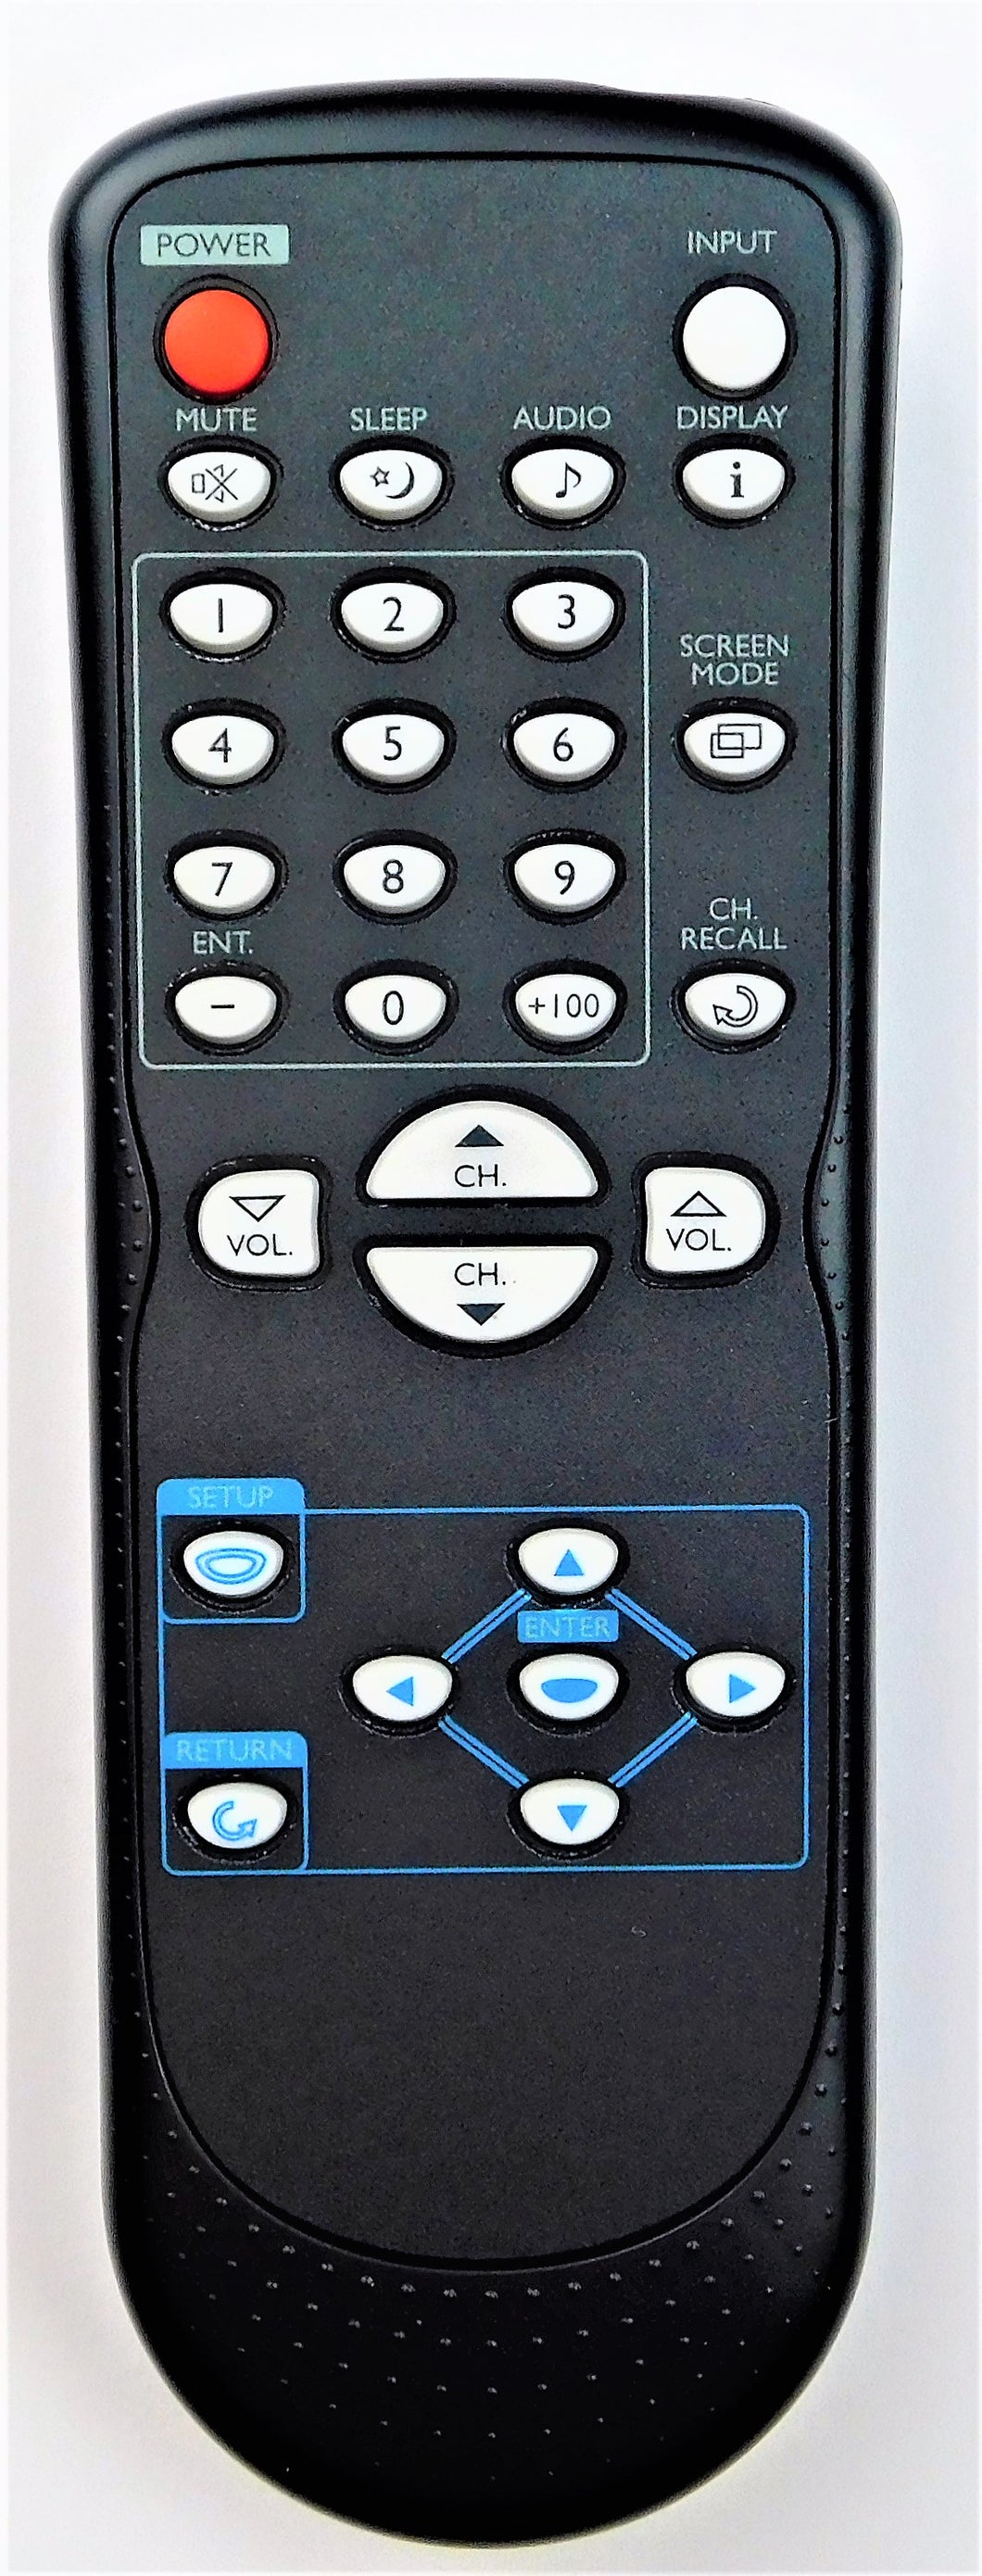 OEM replacement remote control for Emerson, GFM, Sylvania, Symphonic LCD TVs NF604UD